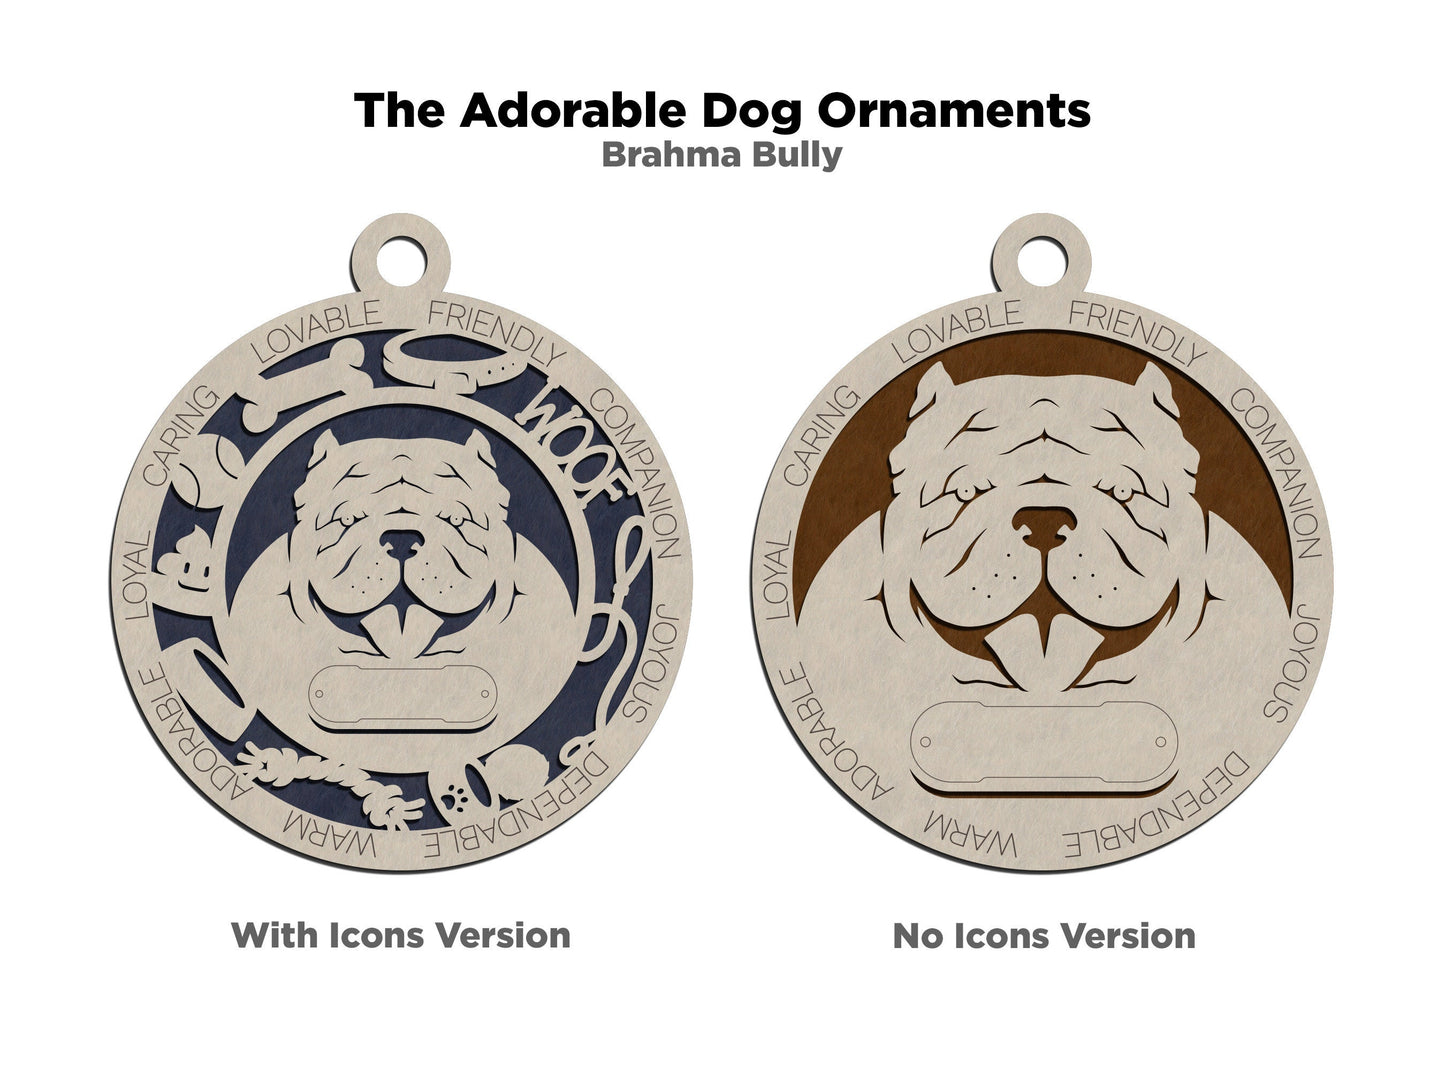 Brahma Bully - Adorable Dog Ornaments - 4 Ornaments included - SVG, PDF, AI File Download - Sized for Glowforge